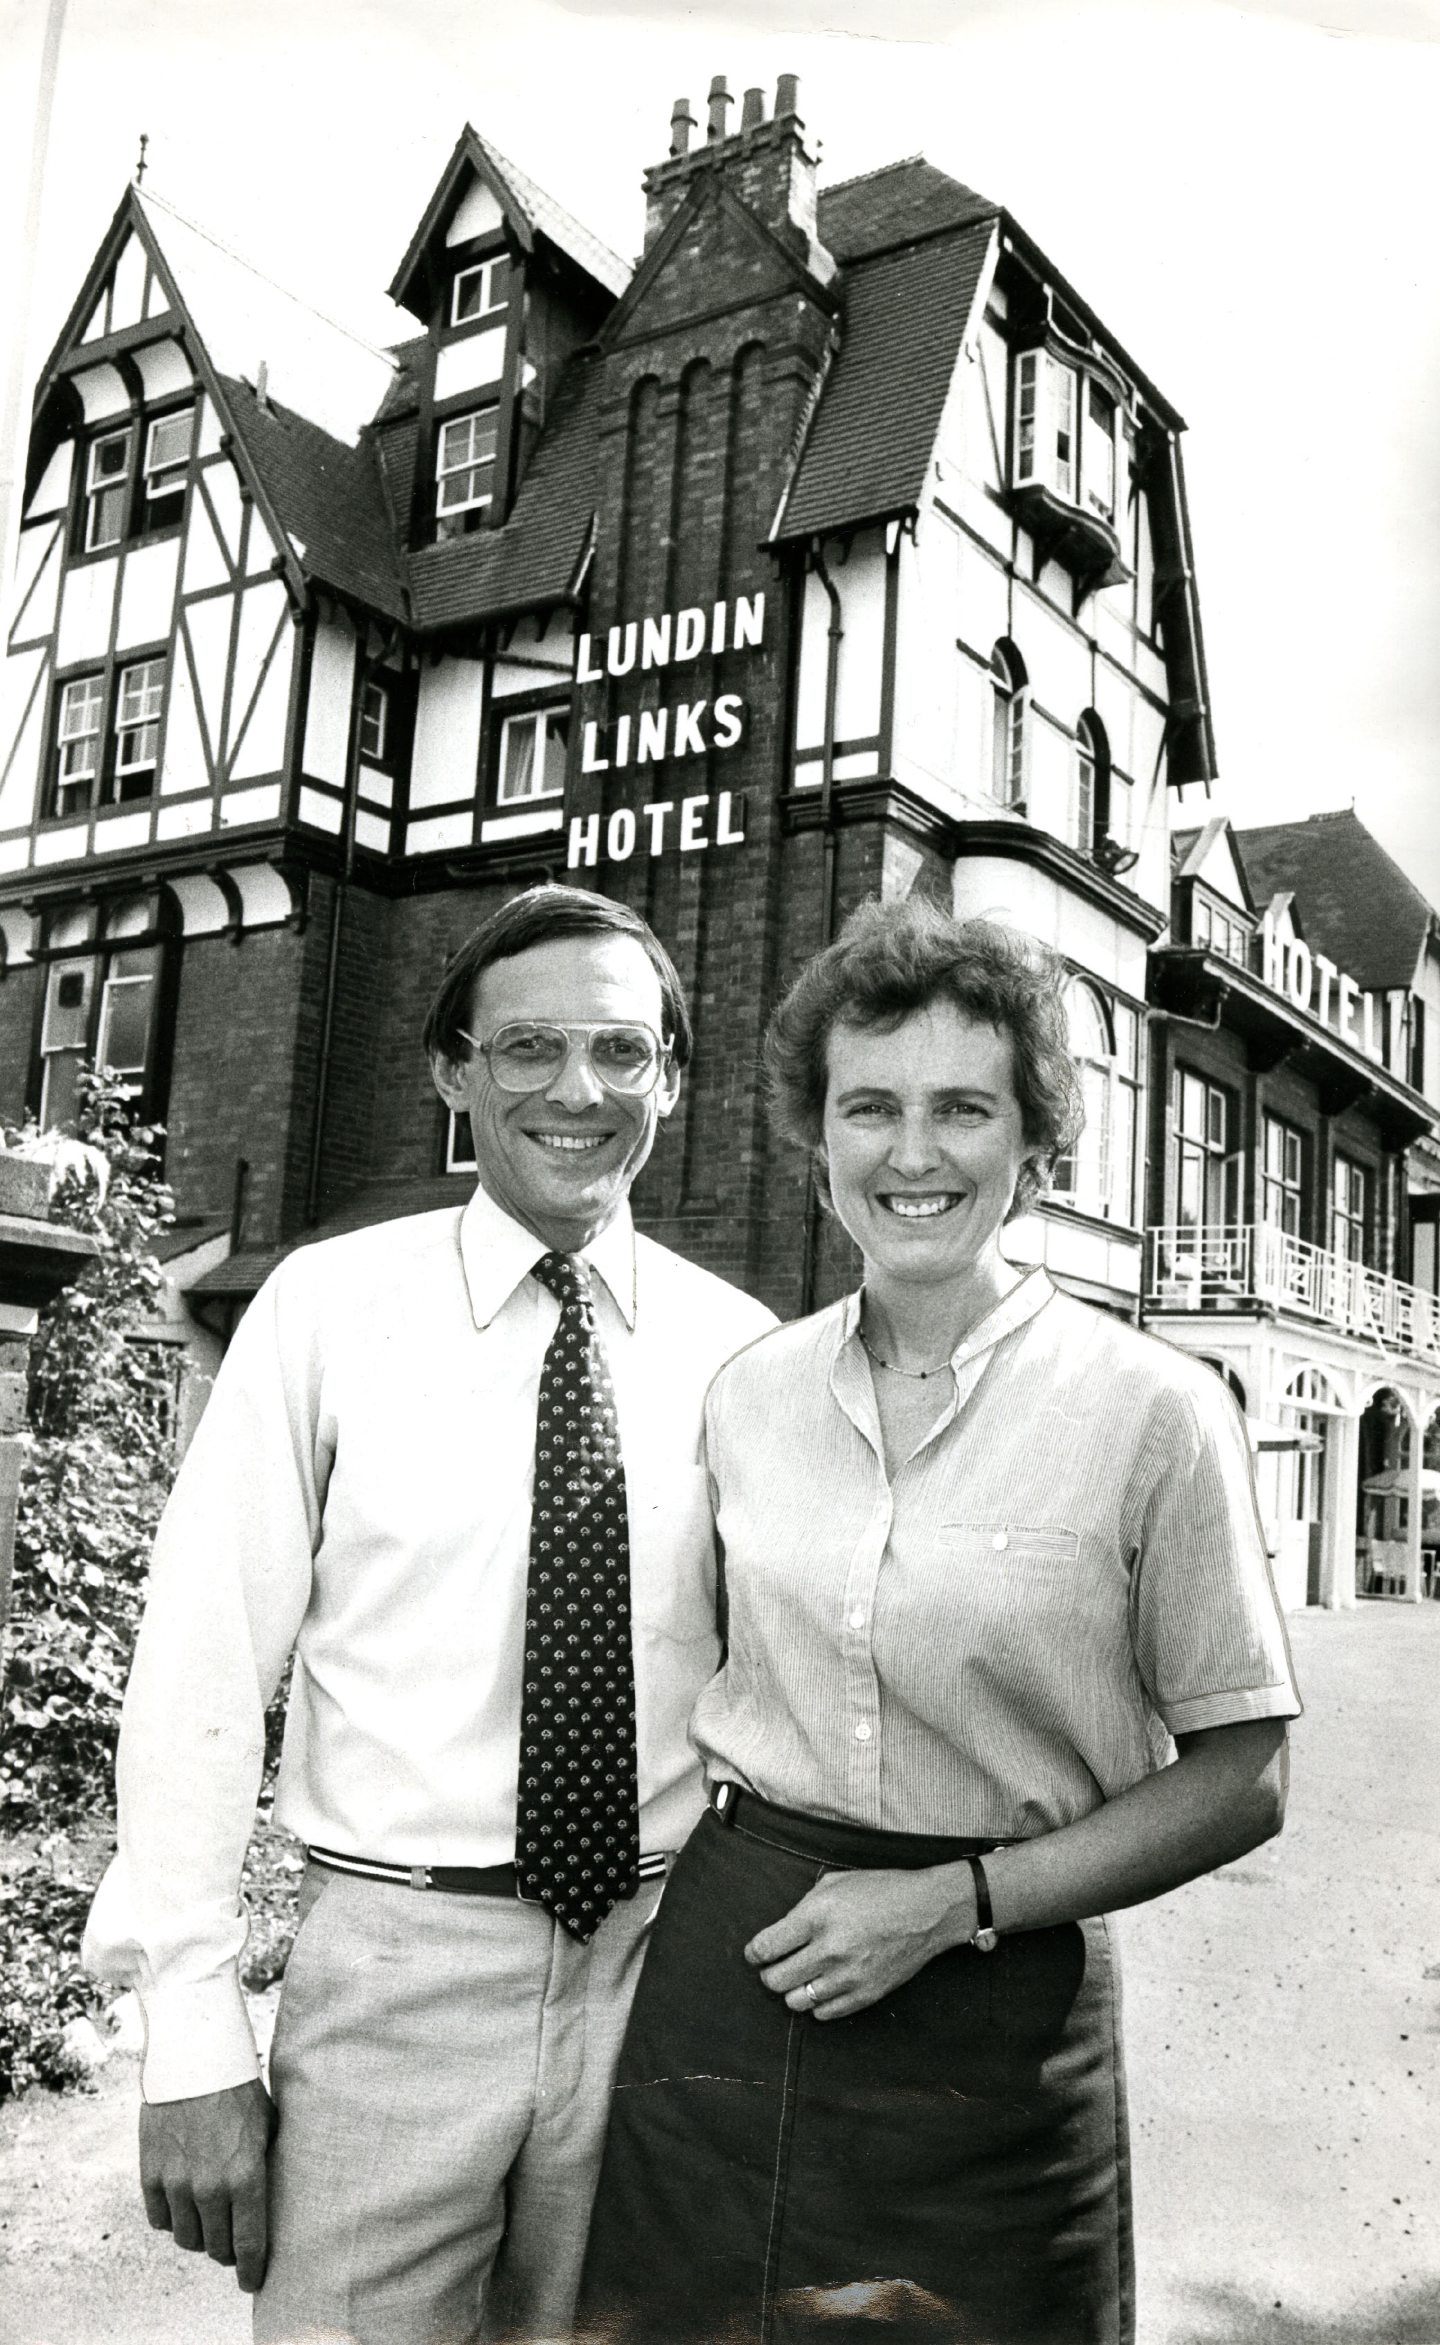 Peter and Mhairi Taylor became the owners of Lundin Links Hotel in 1984.